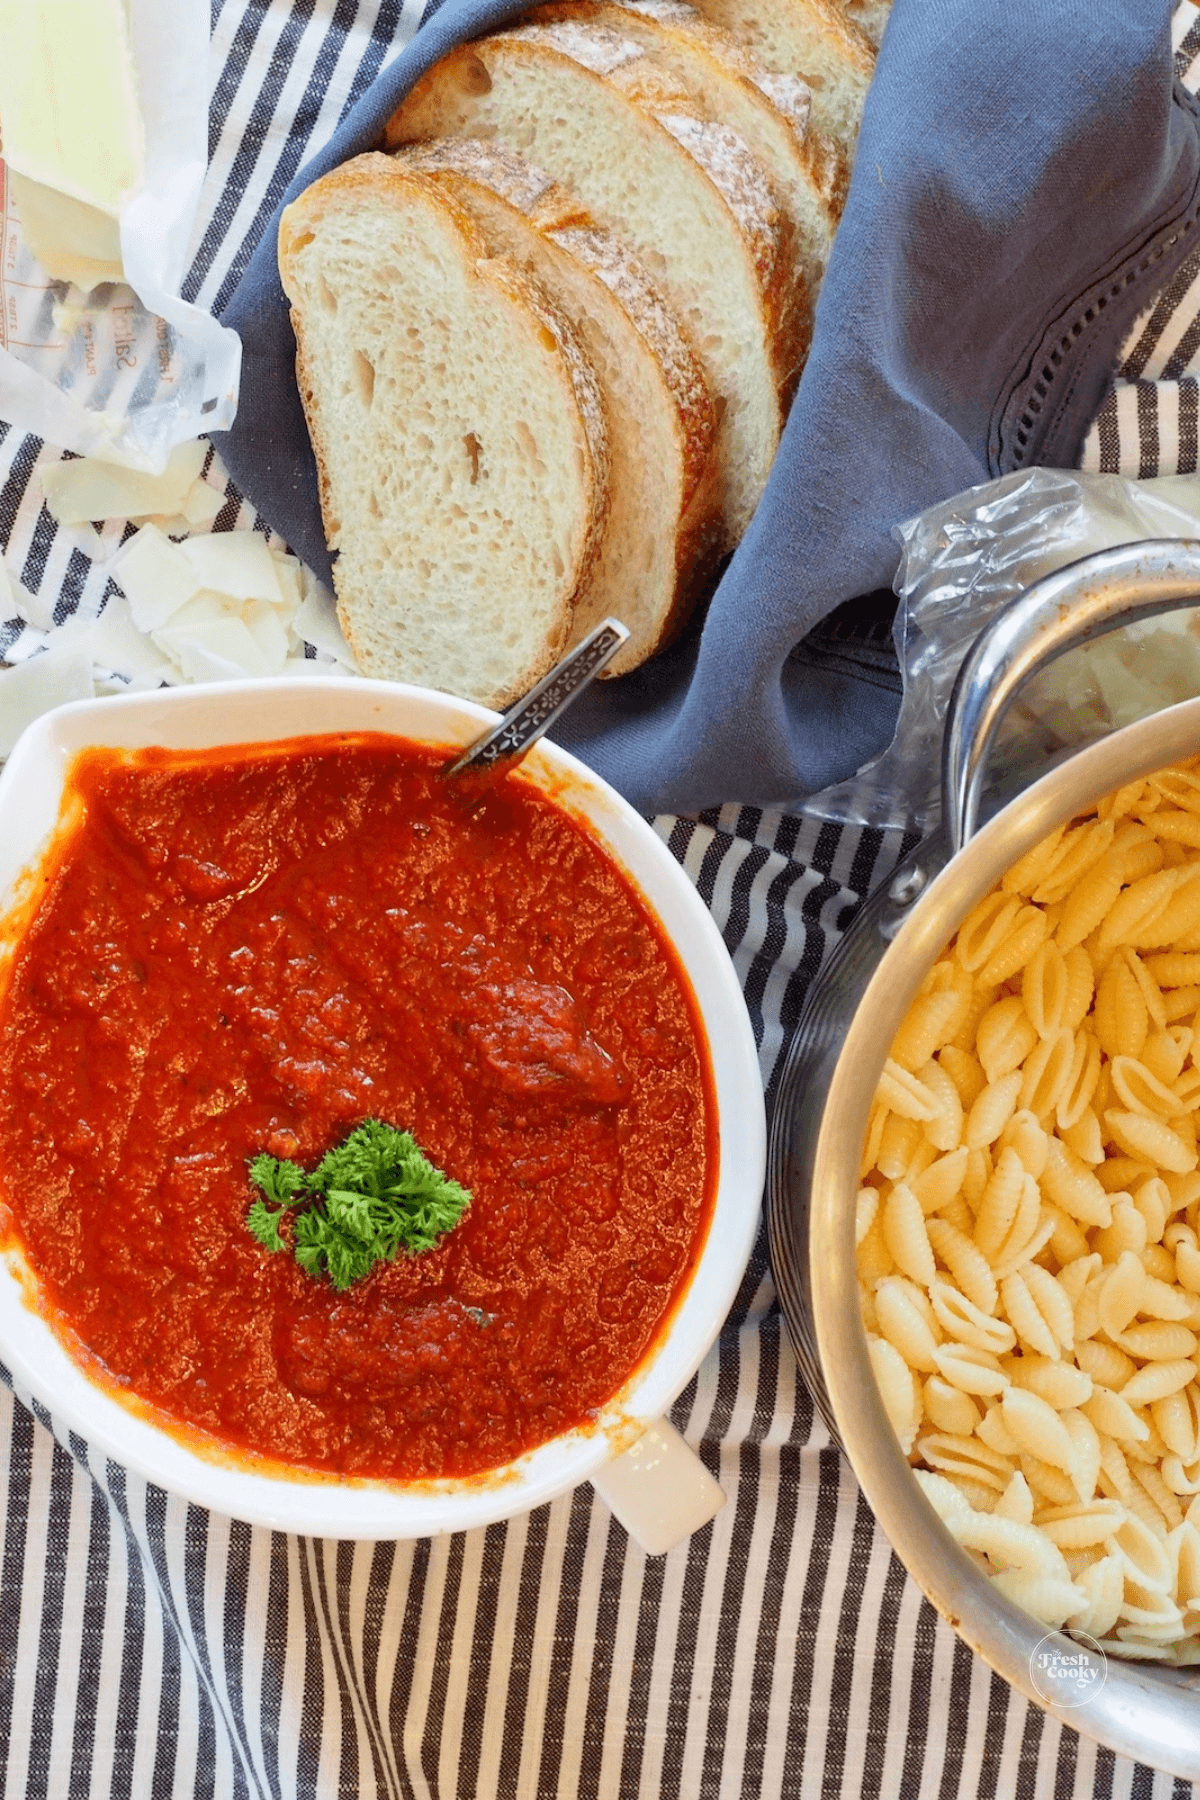 Bowl of thick authentic spaghetti sauce with pasta and sliced Italian bread.